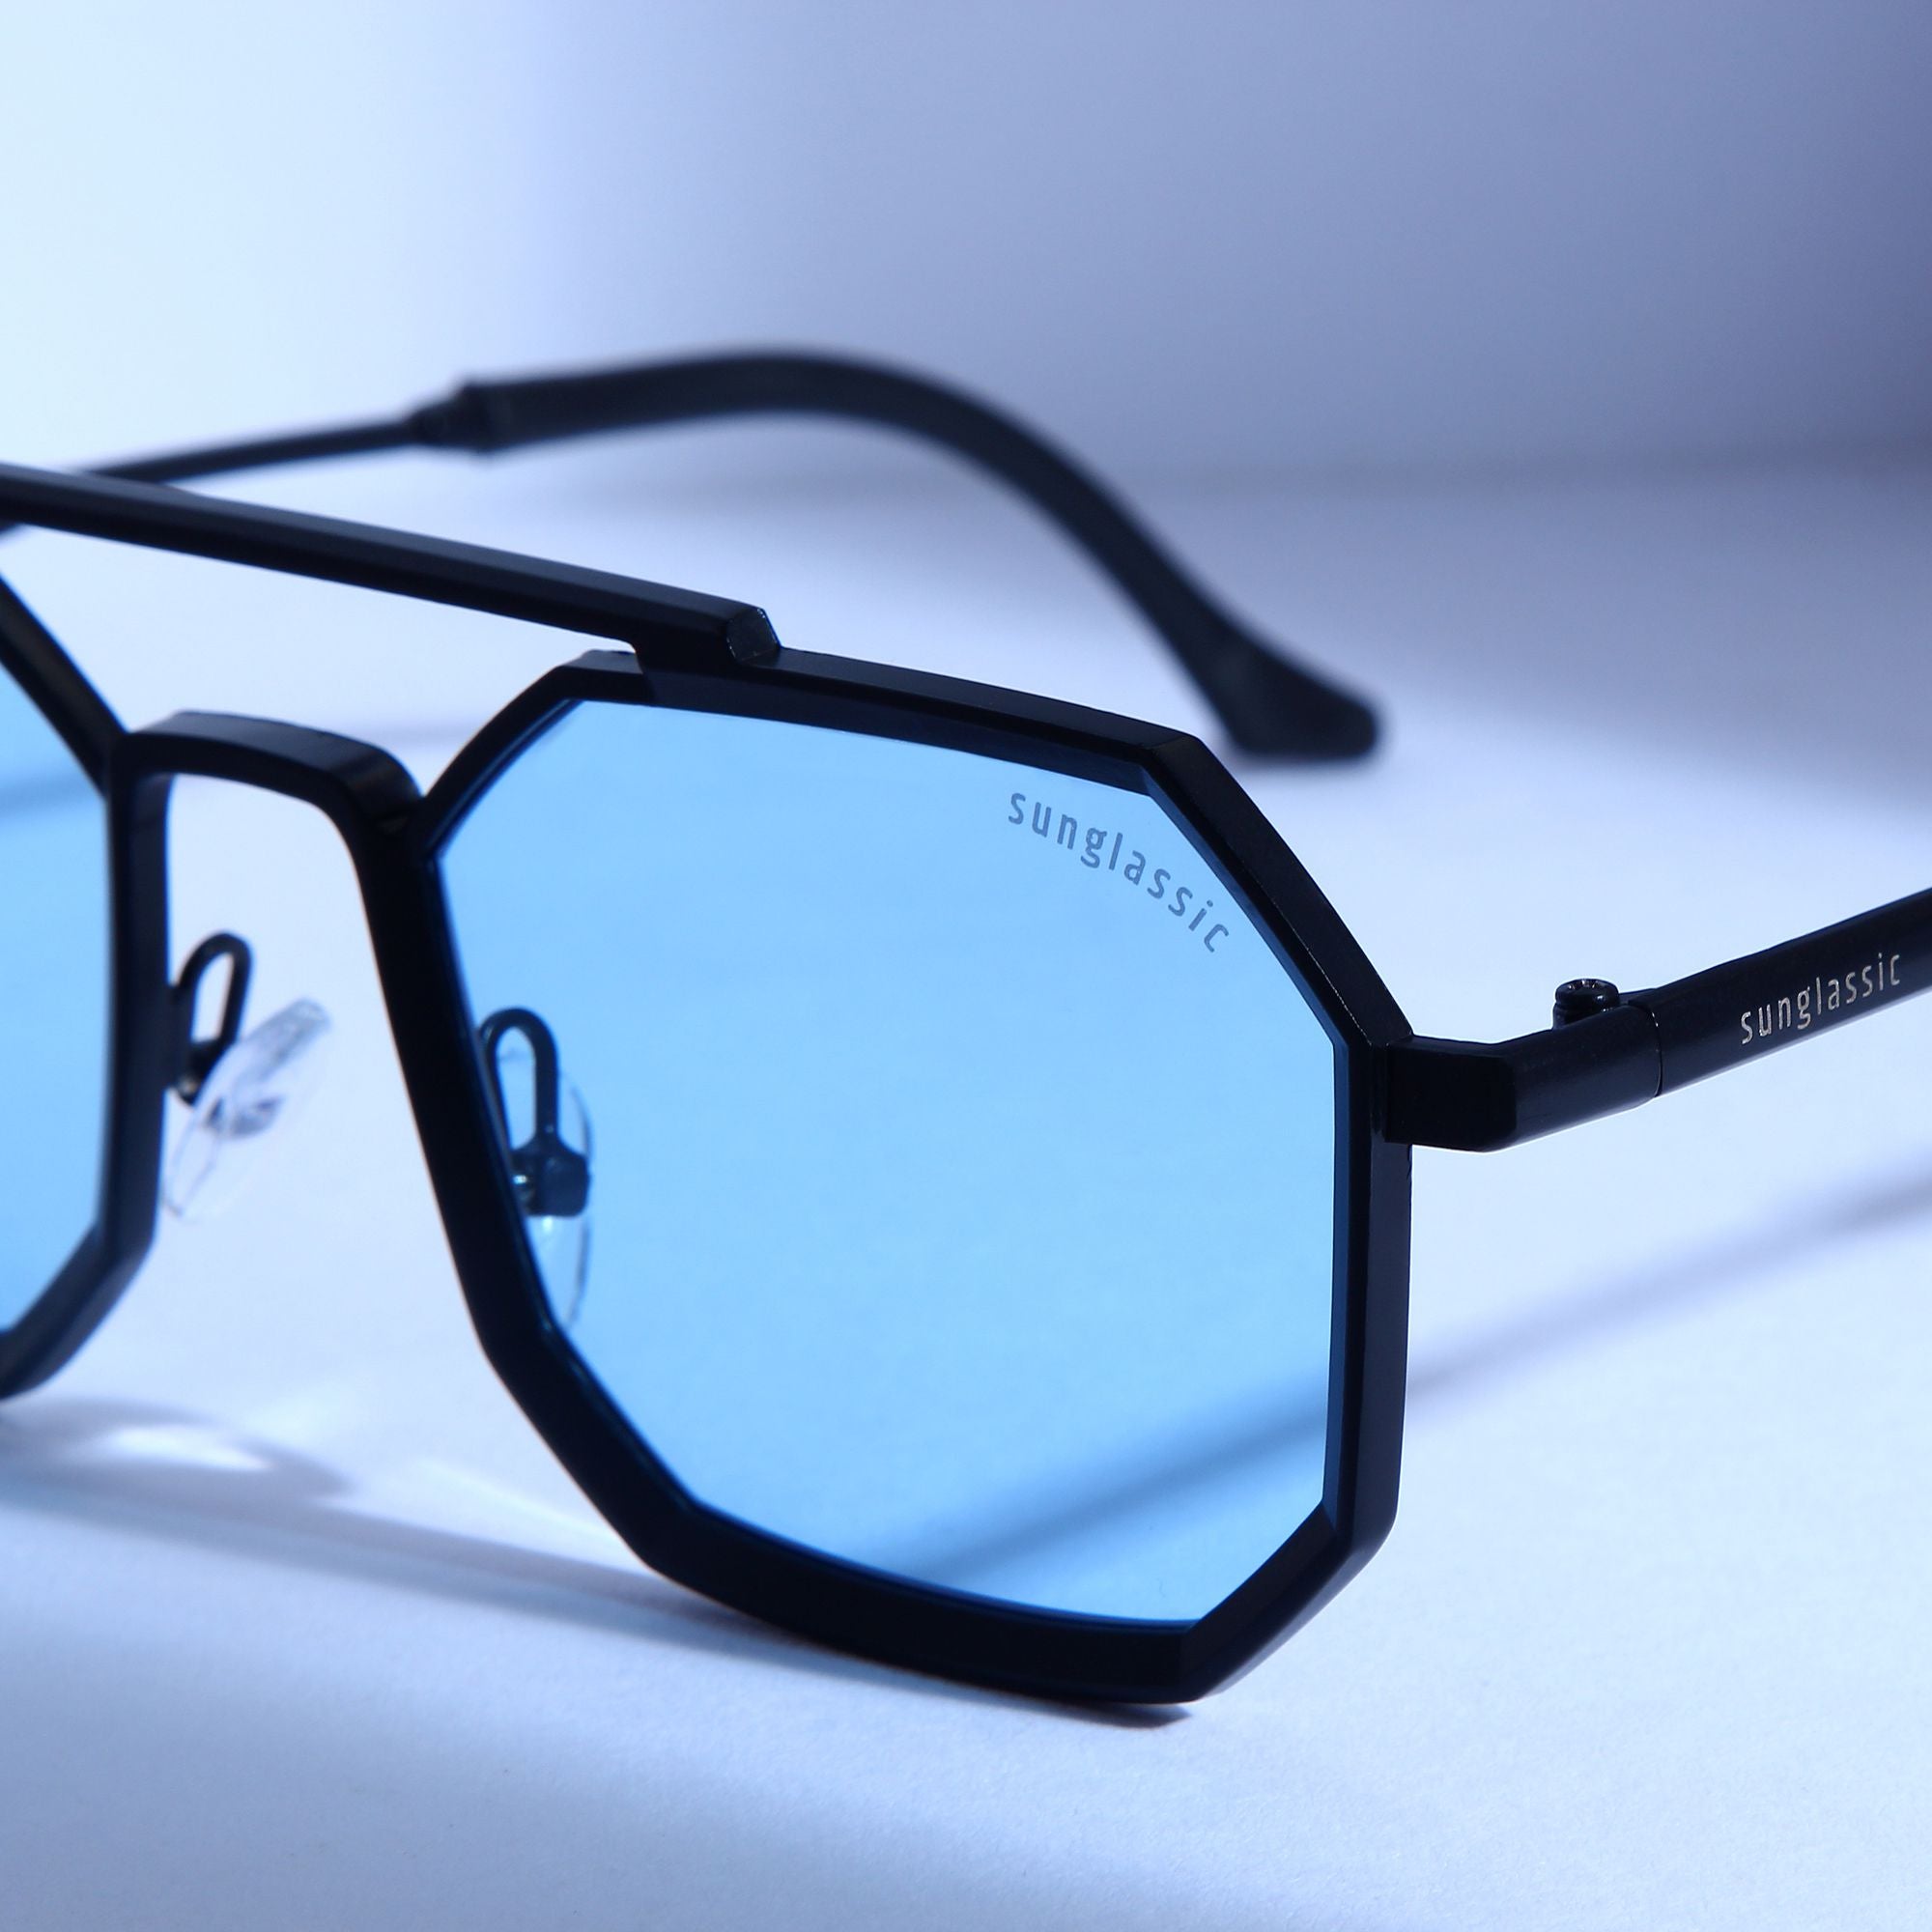 Commando Black Blue Edition Octagon Sunglasses by Sunglassic. High-quality lenses that are made to last.